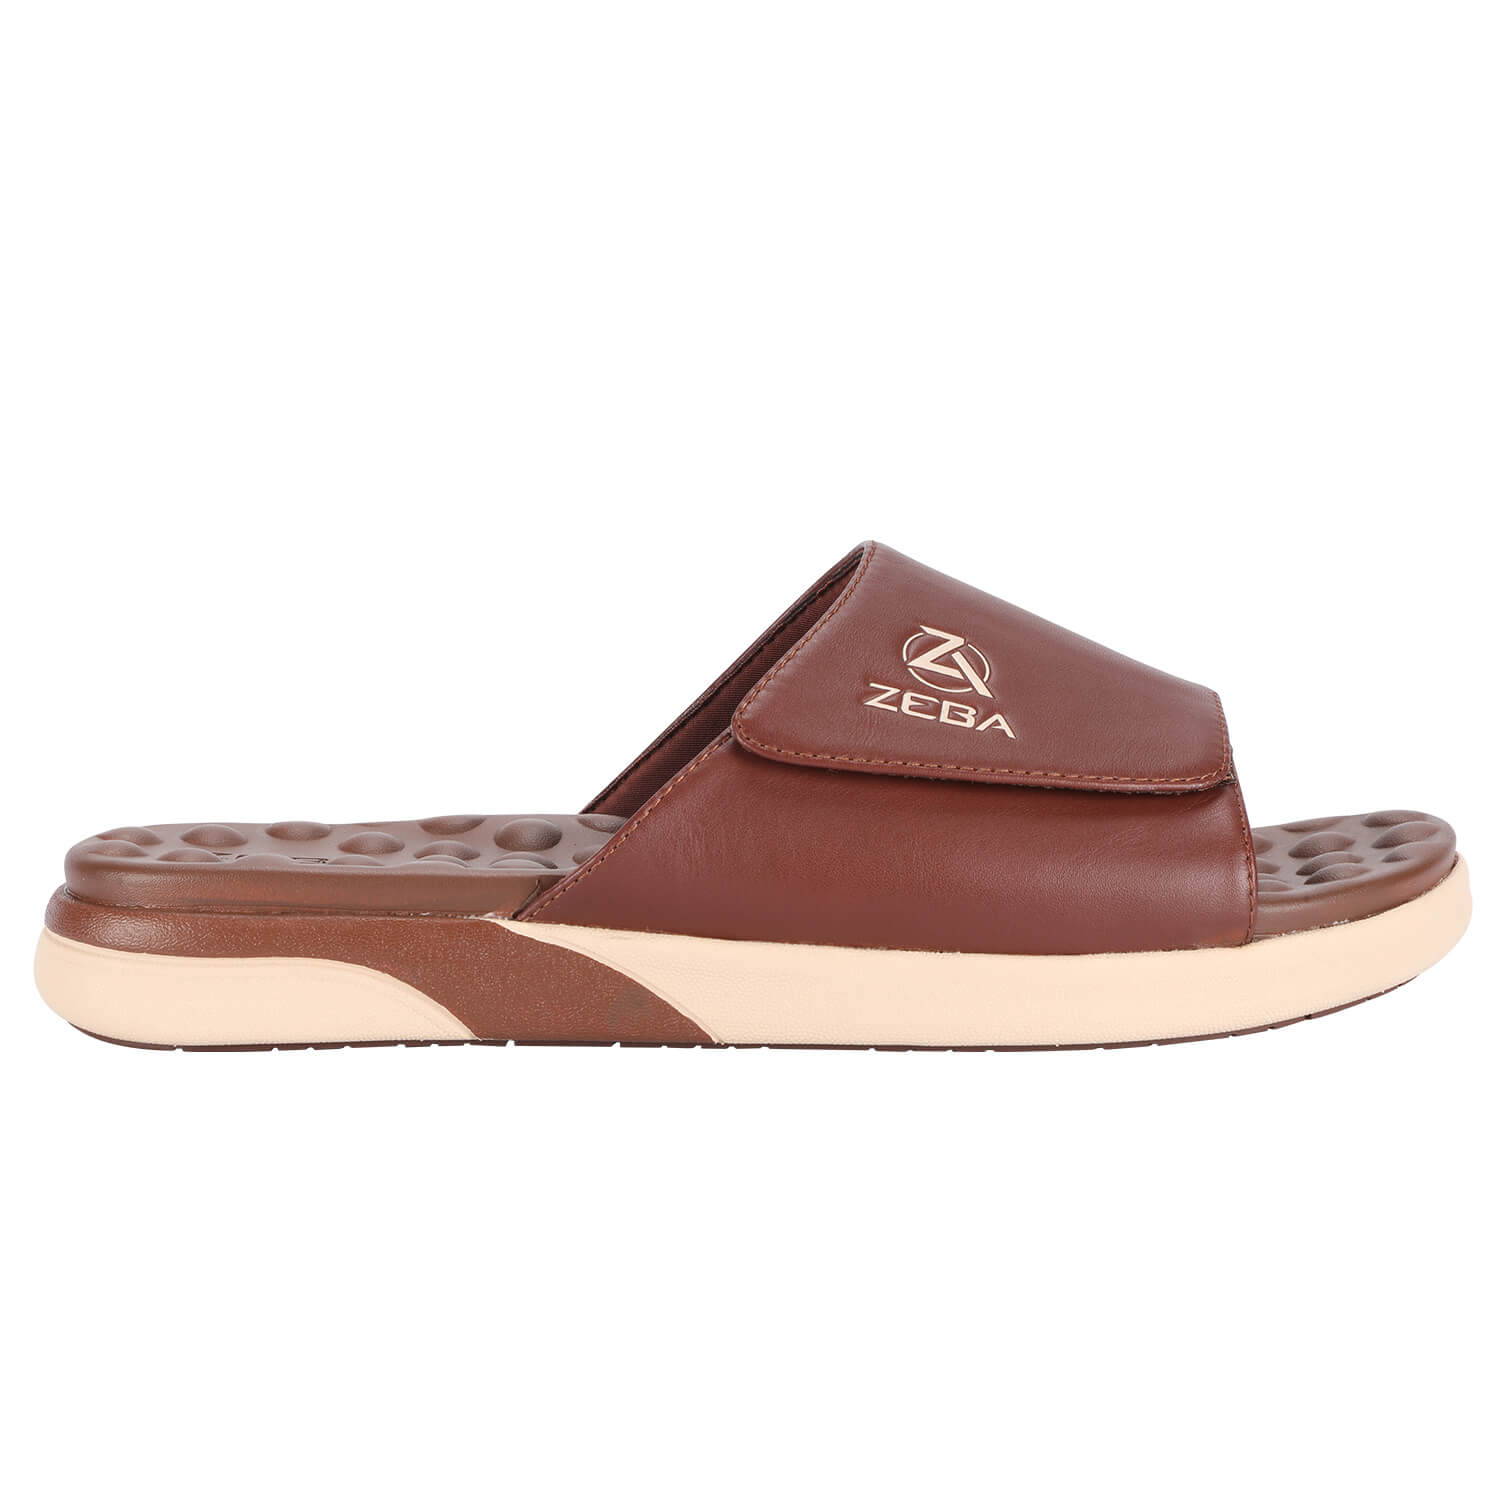 Brown Massaging Leather Sandals With Strap (Sizes 7-16 Available) – Zeba  Shoes